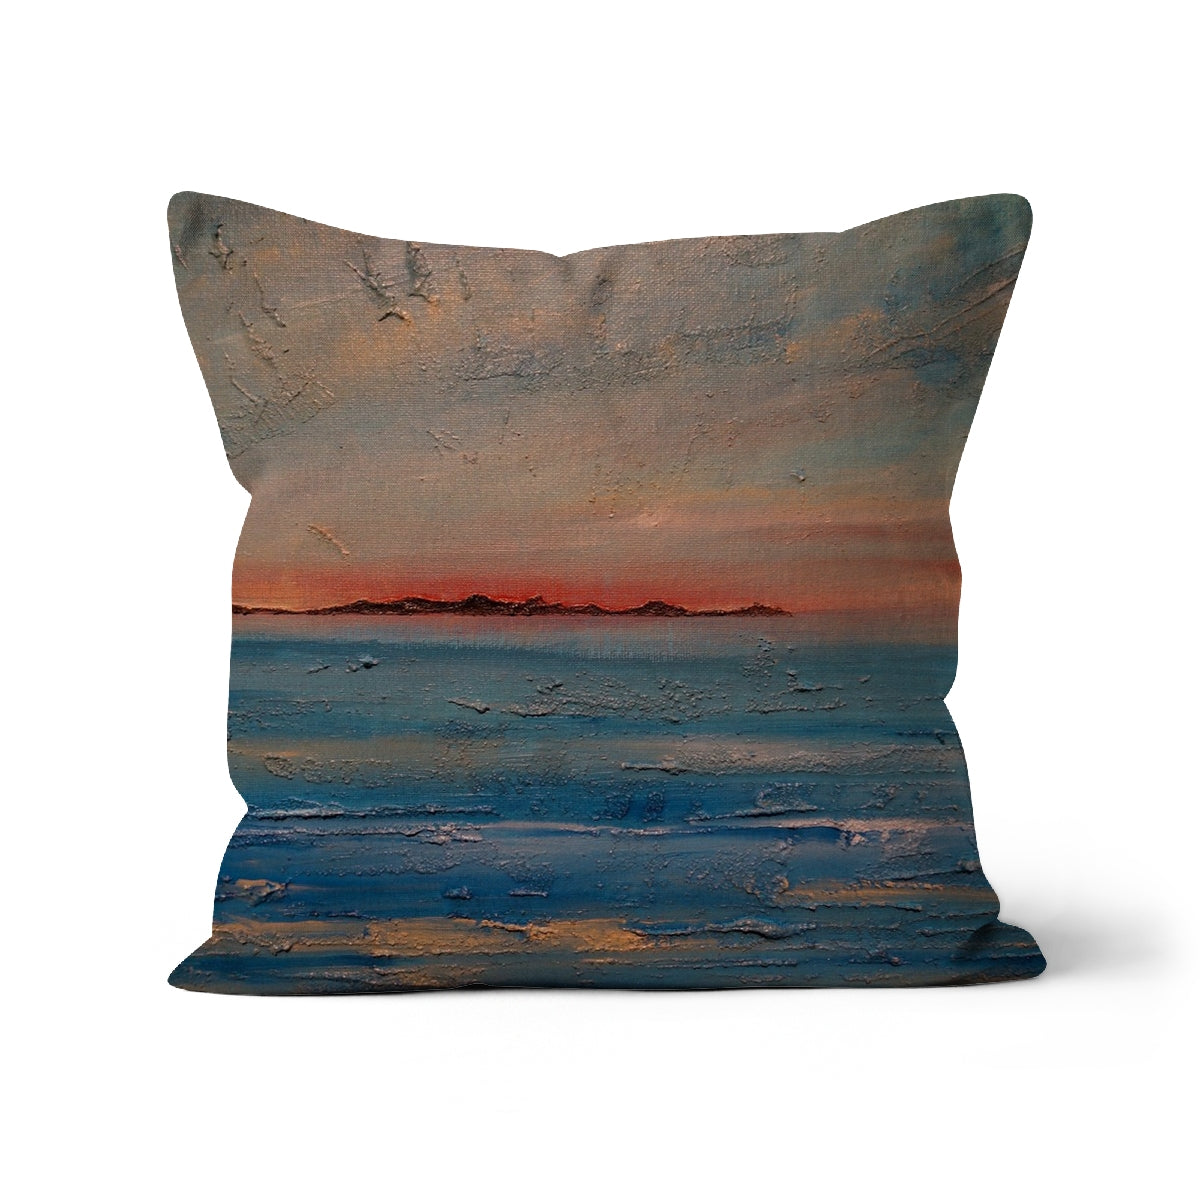 Gigha Sunset Art Gifts Cushion-Cushions-Hebridean Islands Art Gallery-Faux Suede-24"x24"-Paintings, Prints, Homeware, Art Gifts From Scotland By Scottish Artist Kevin Hunter